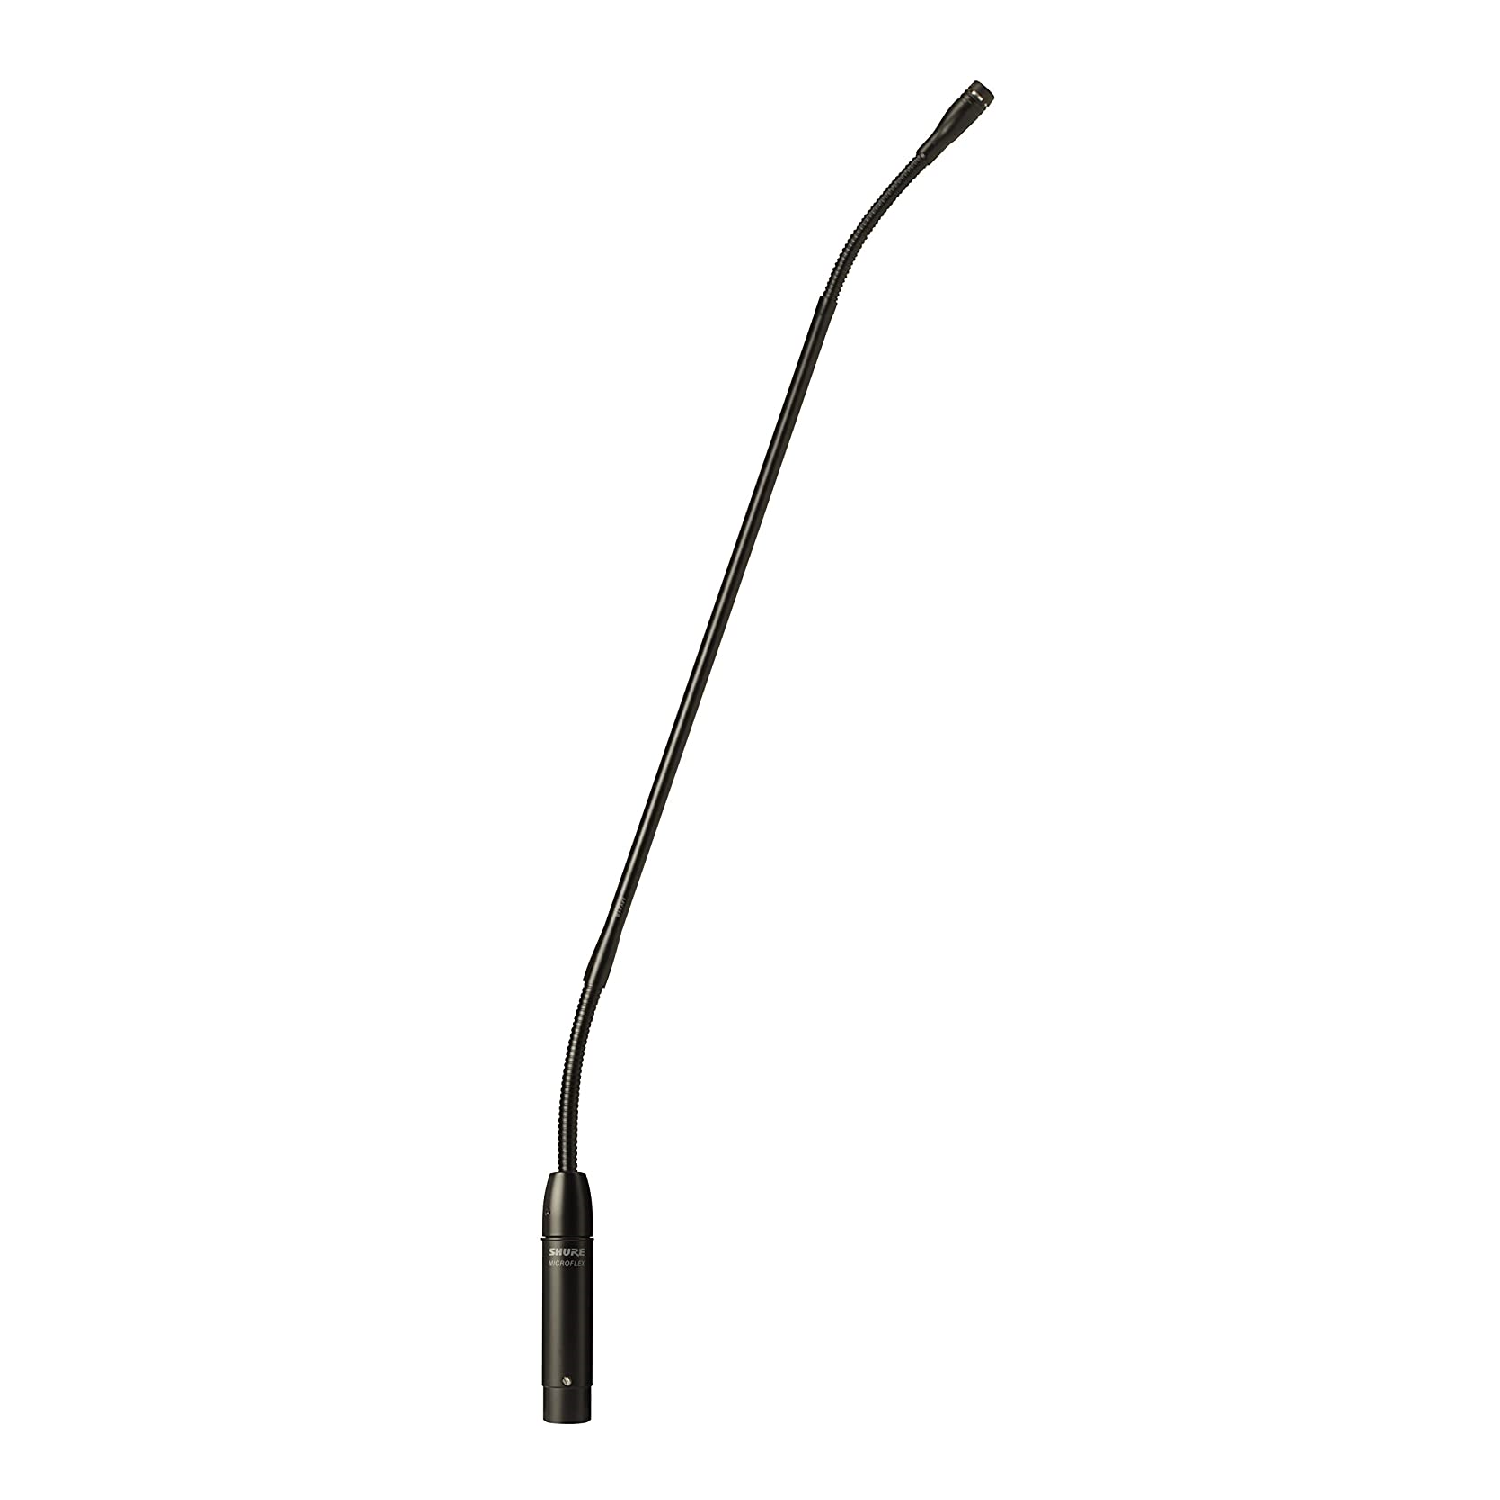 Cardioid Condenser Microphone, 18 Inches Gooseneck with Attached XLR Preamp, Mute Switch, LED Indicator   MX418S/CX shure